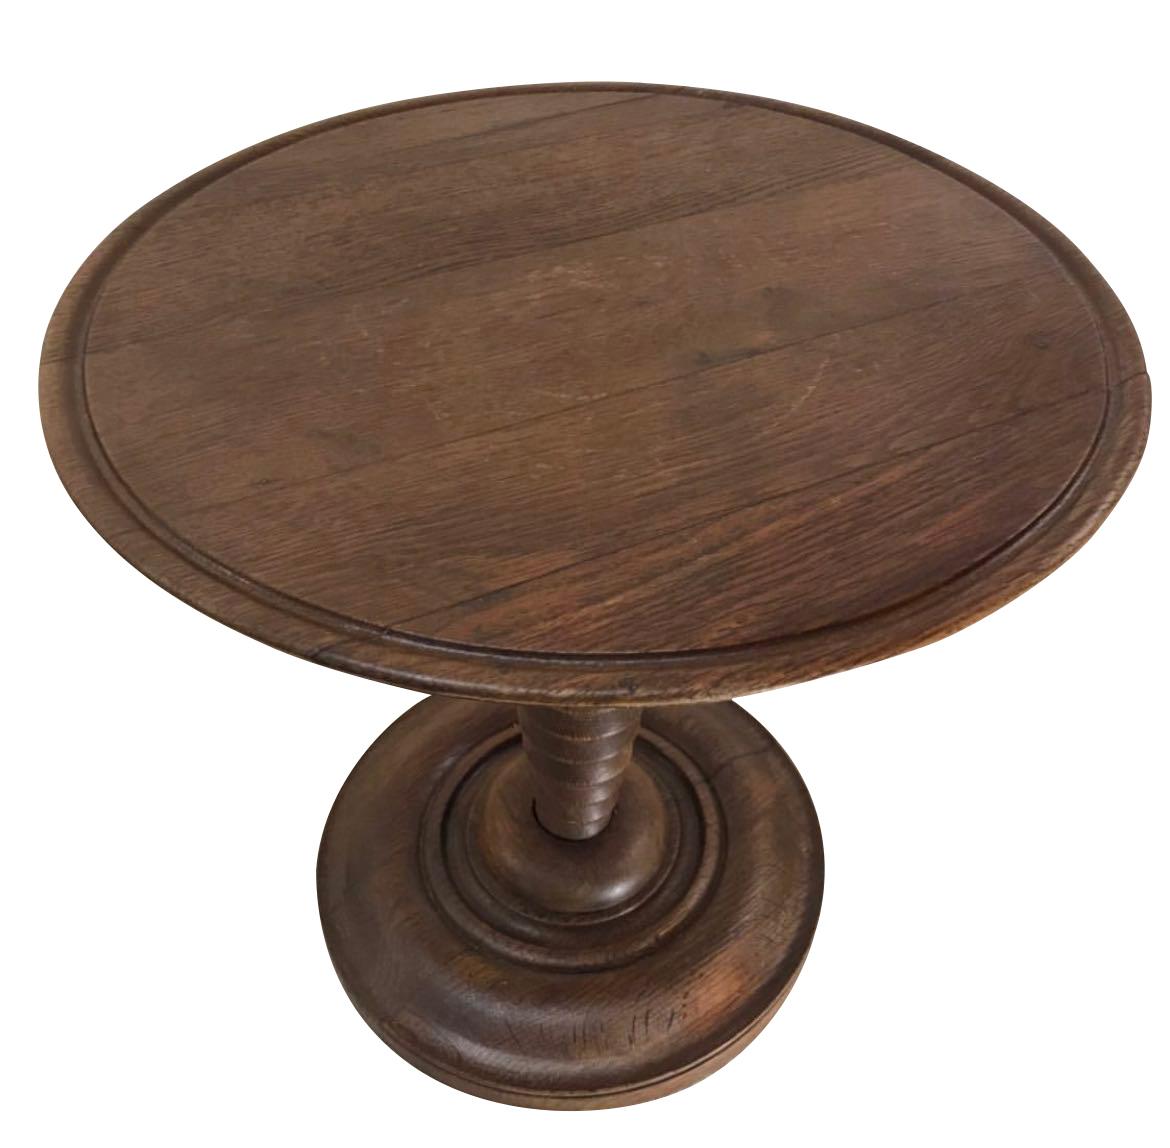 Mid Century French round oak side table with decorative tiered column base.
In the style of Charles Dudouyt.
